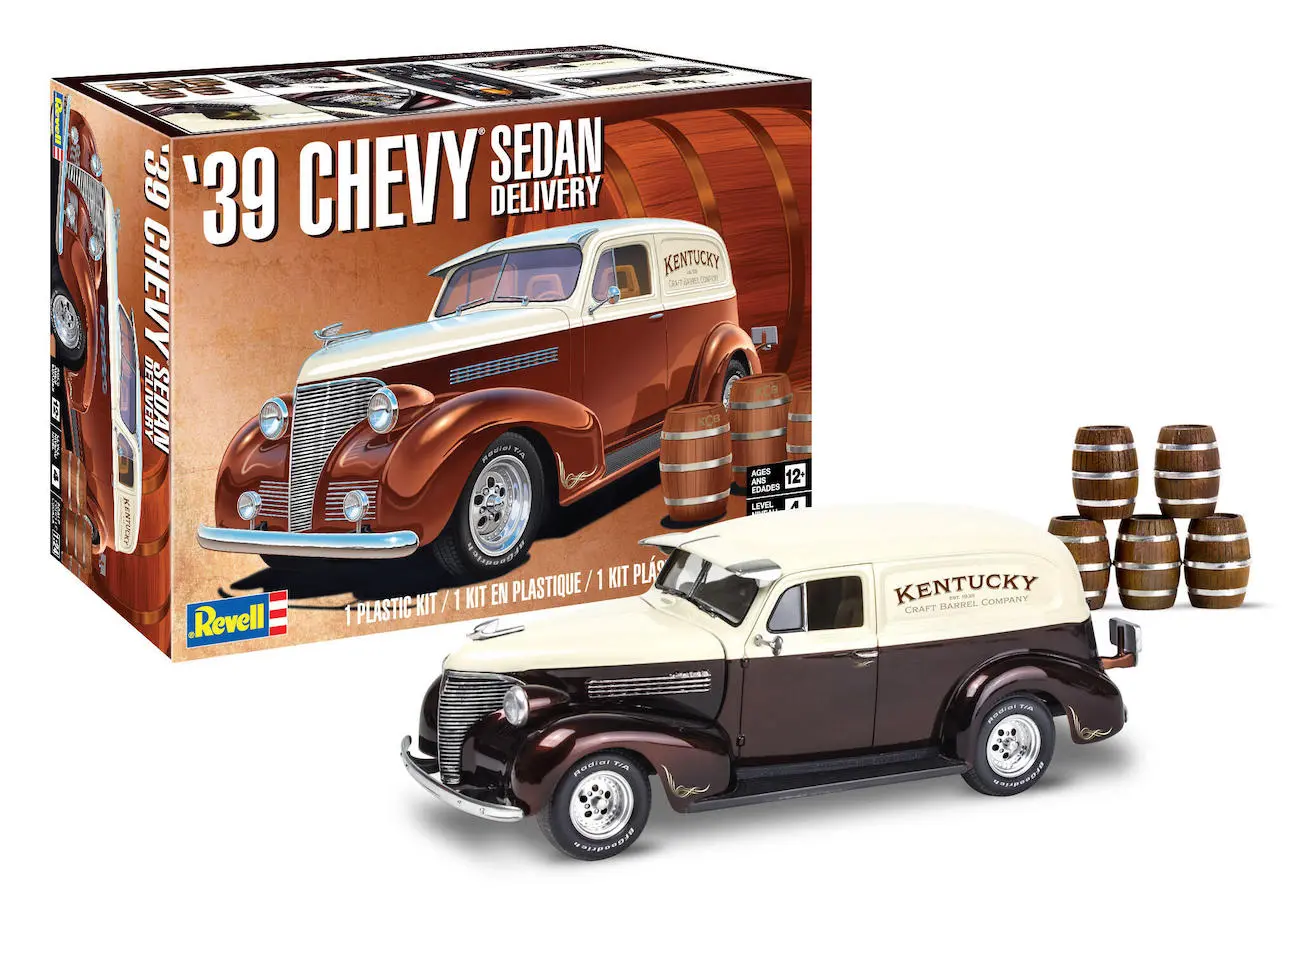 Revell 14529 - 1939 Chevy Sedan Delivery